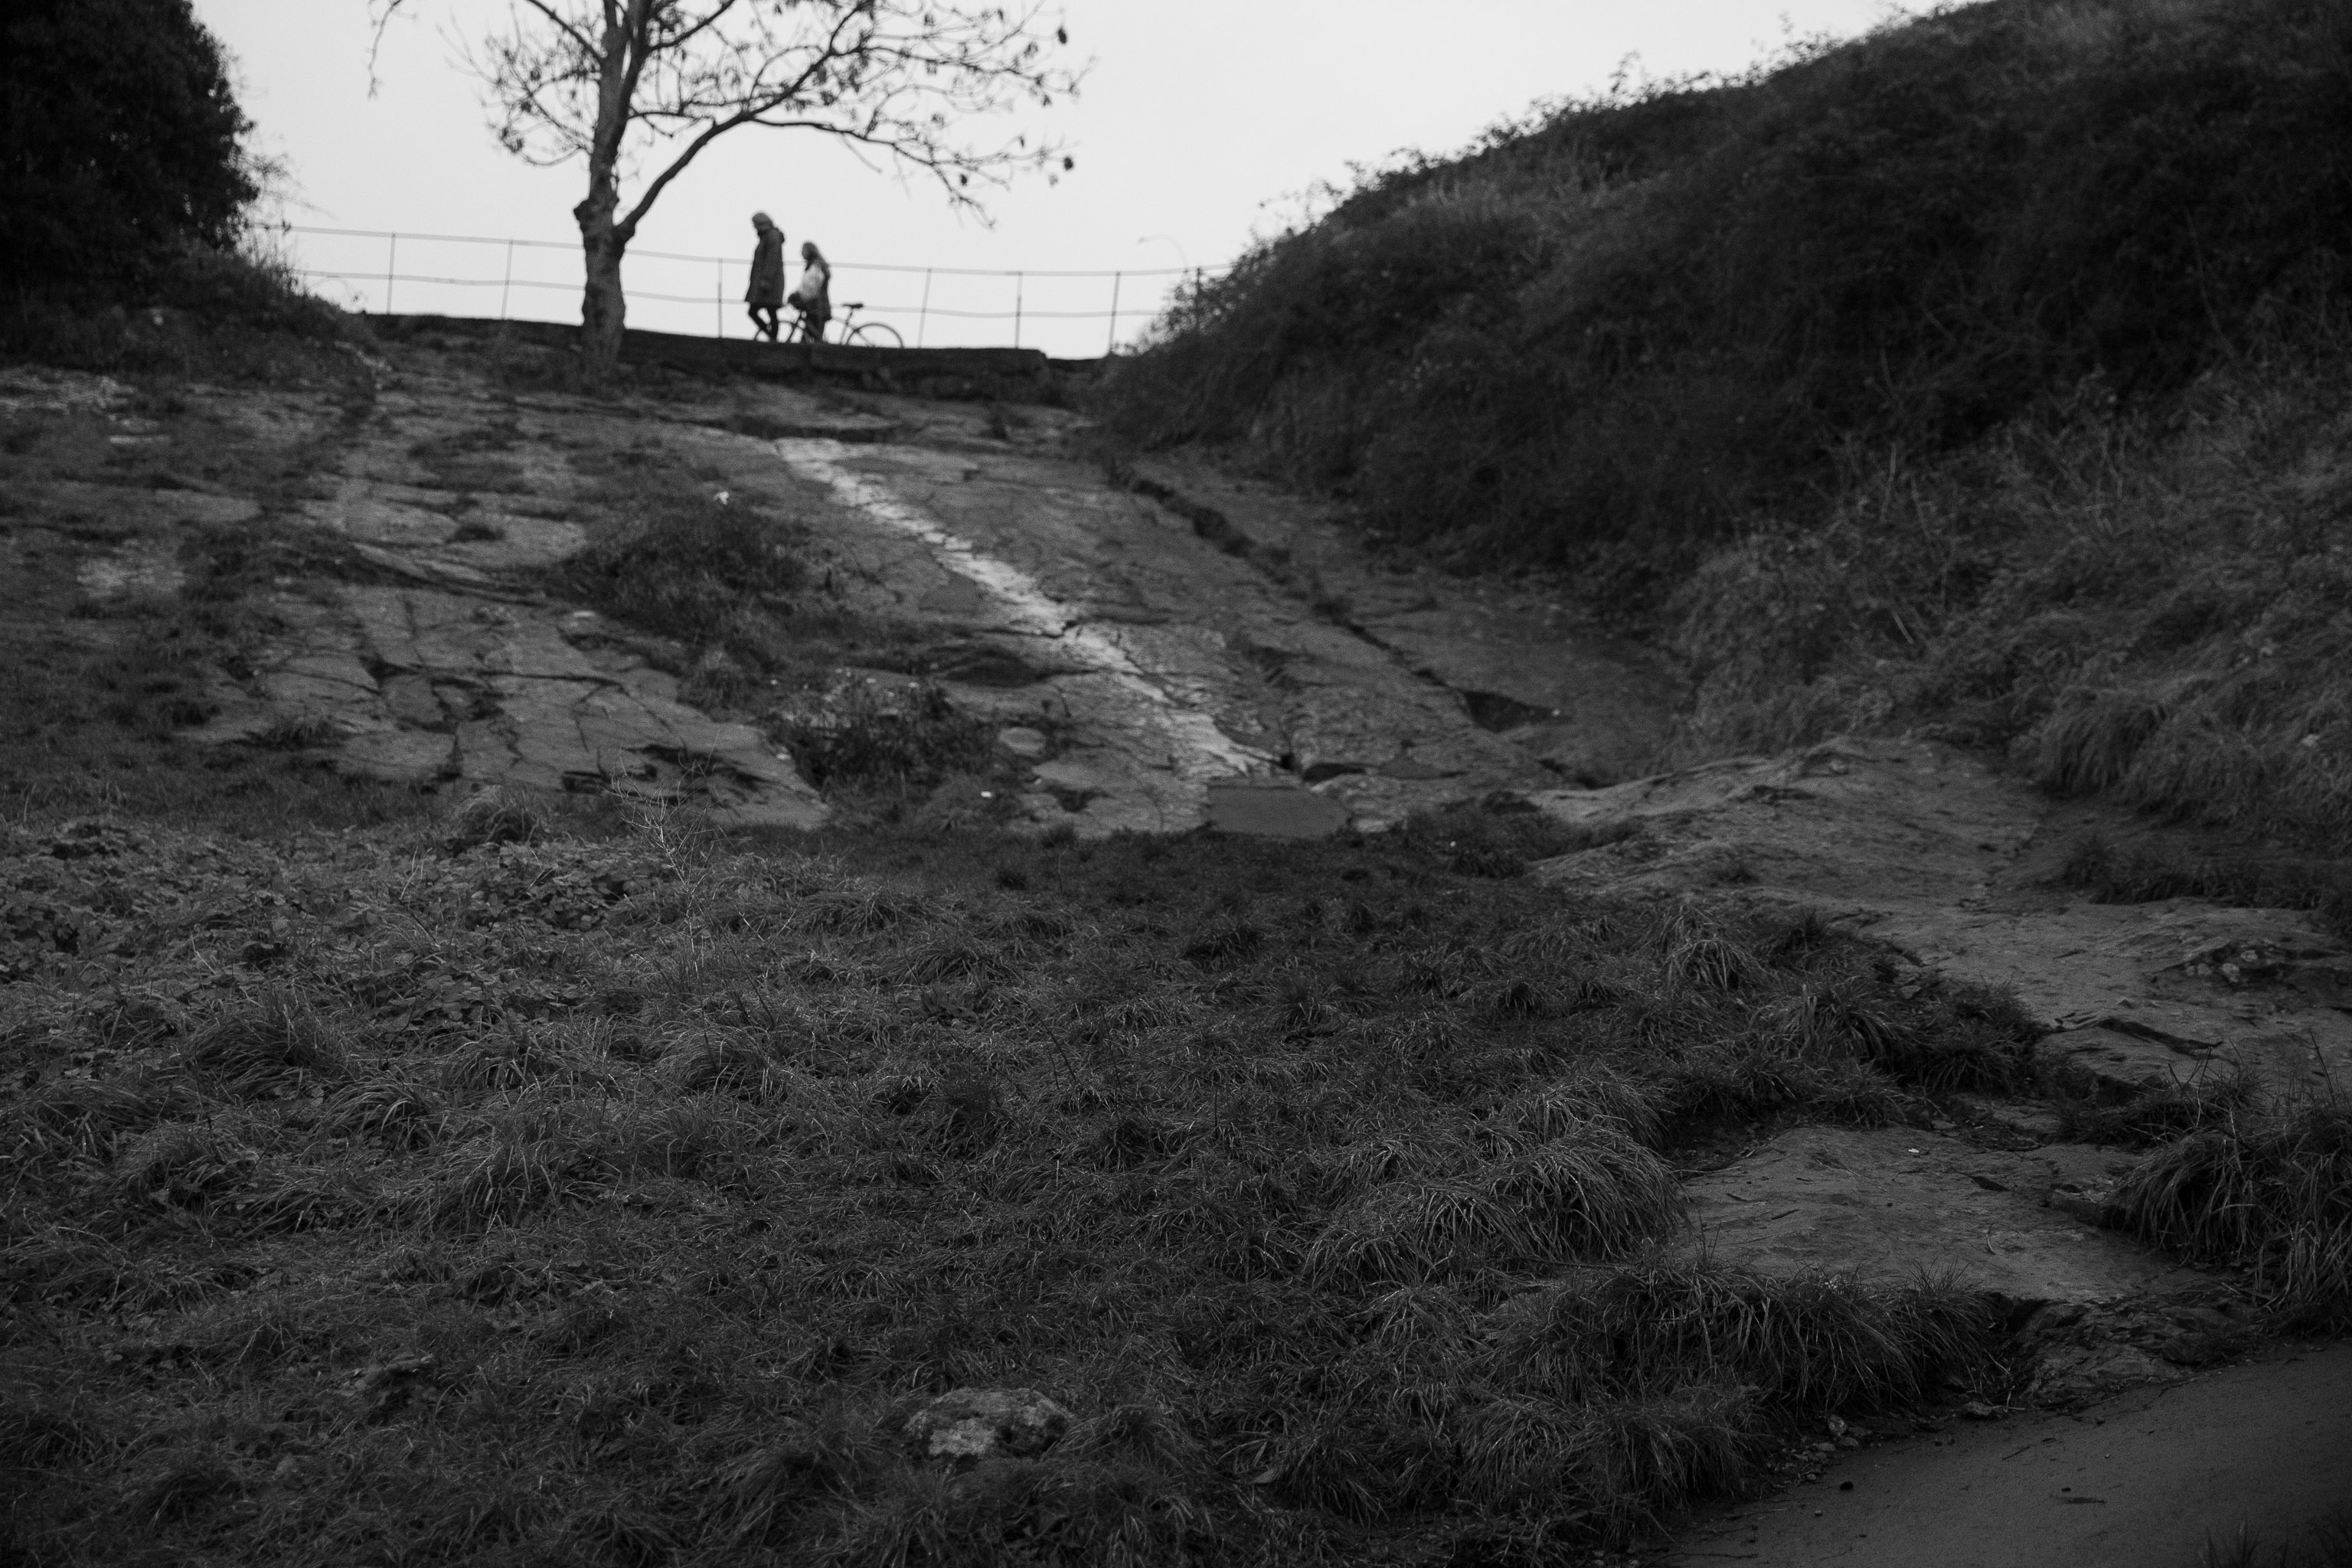 Rock Slide
A Bristol tradition. Not quite sure what I was focusing on here, but it was early and dark and I quite like the picture anyway.
